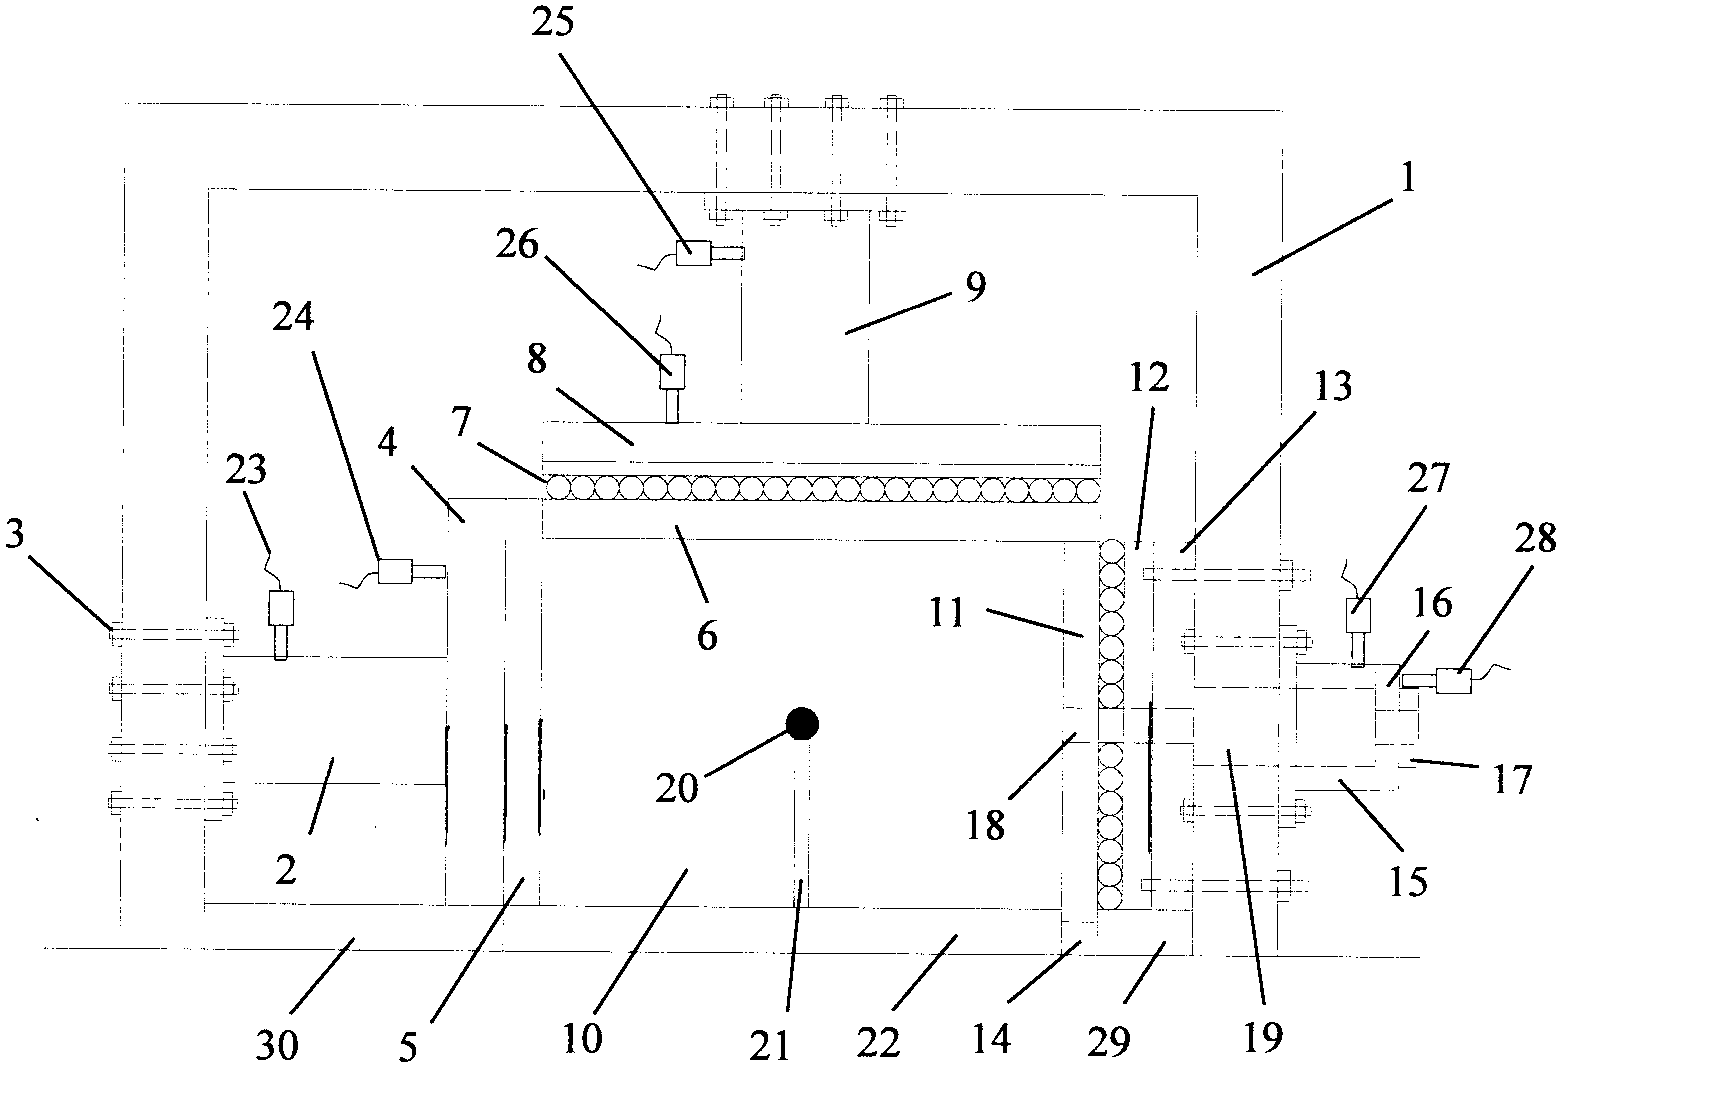 Two-dimensional visualized test device of work mechanism of anchoring system